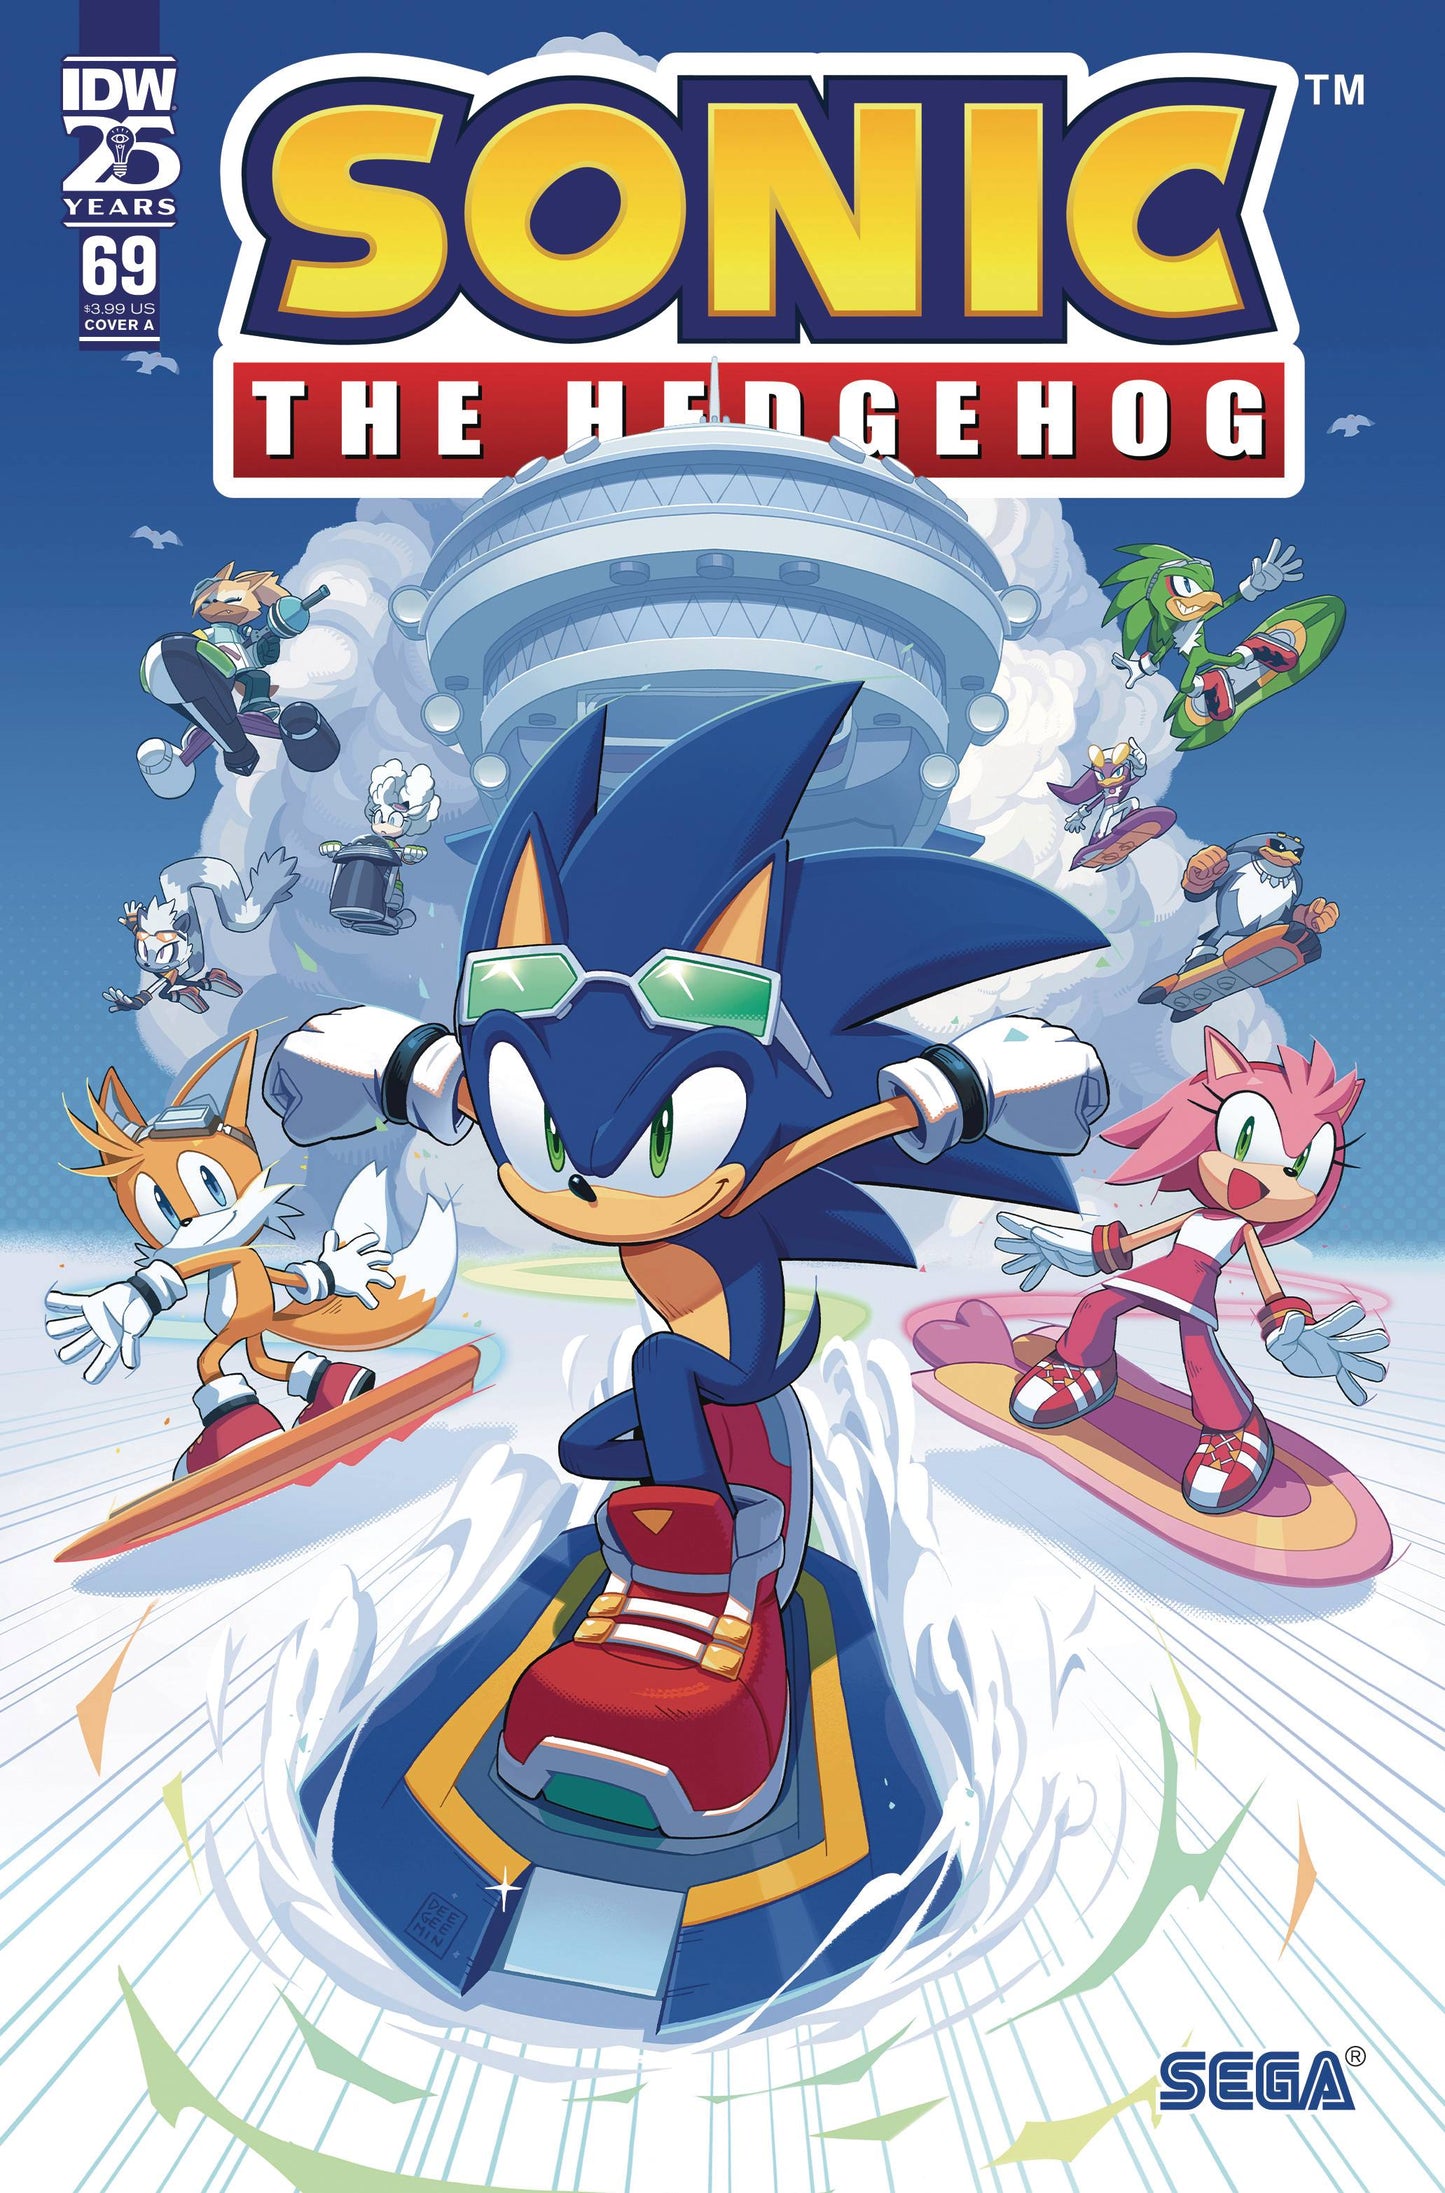 SONIC THE HEDGEHOG #69 CVR A KIM (29 May Release)